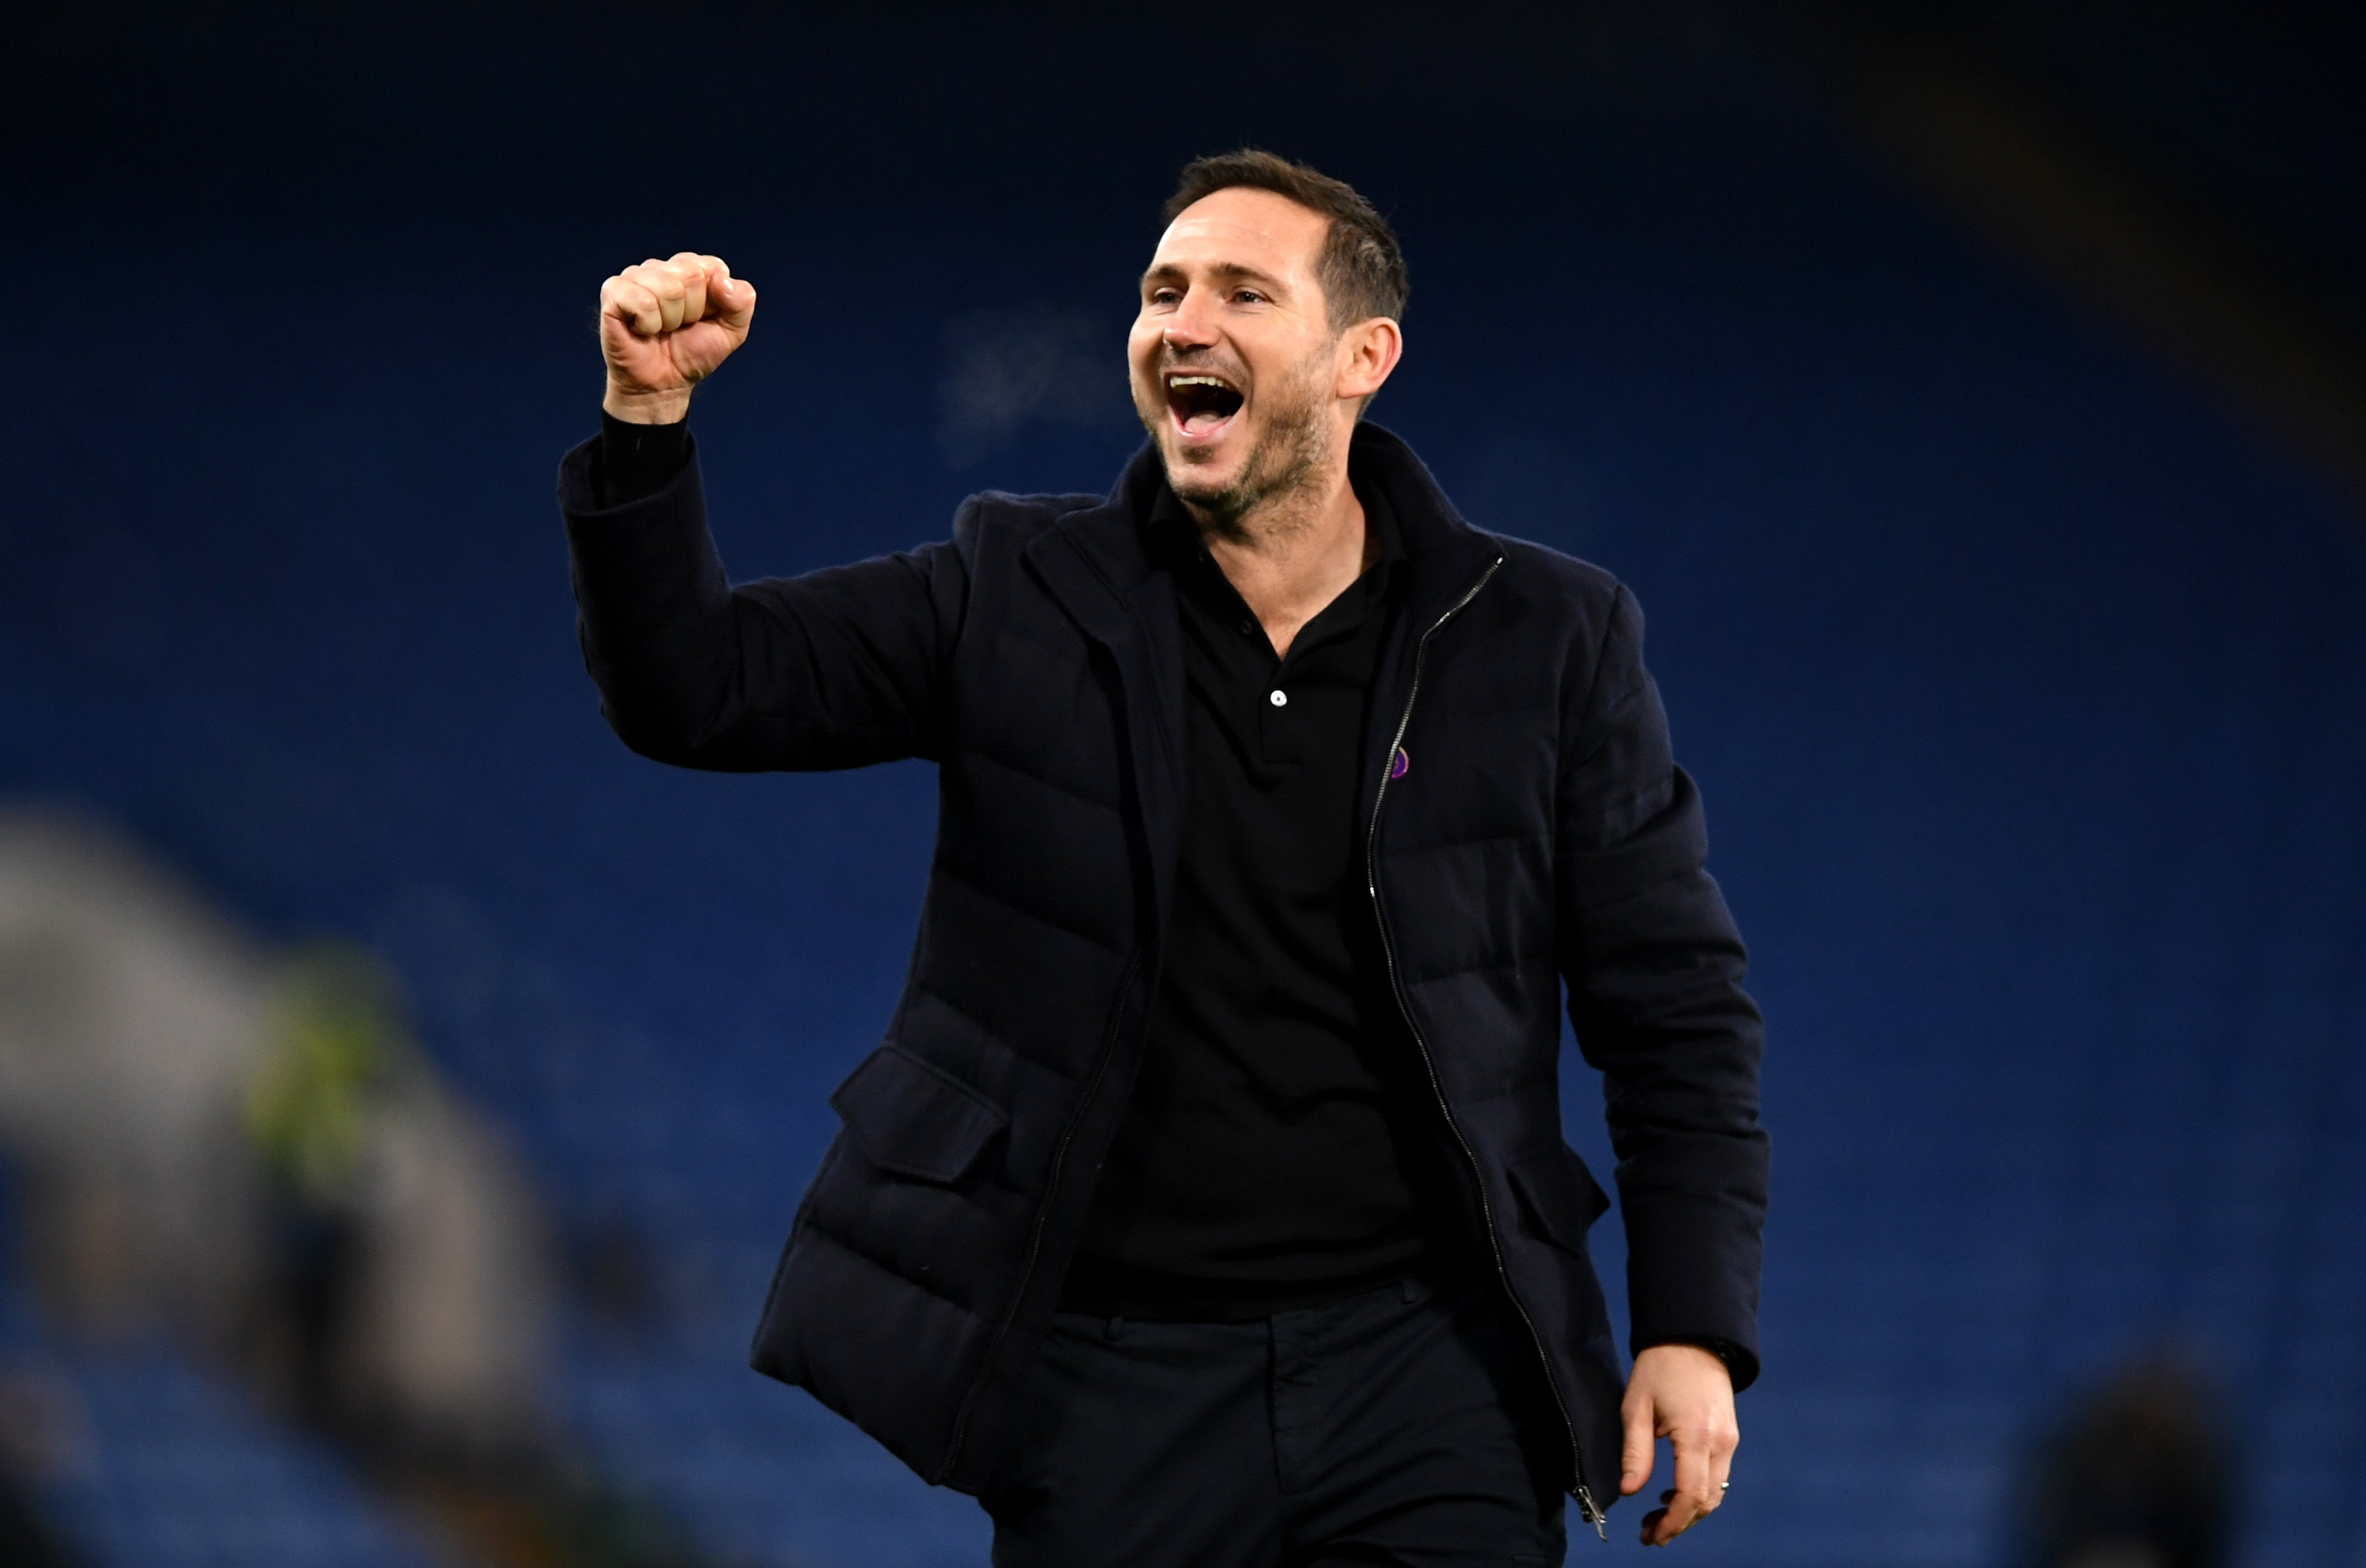 Former Chelsea manager Frank Lampard has now emerged as the frontrunner for the vacant Everton job